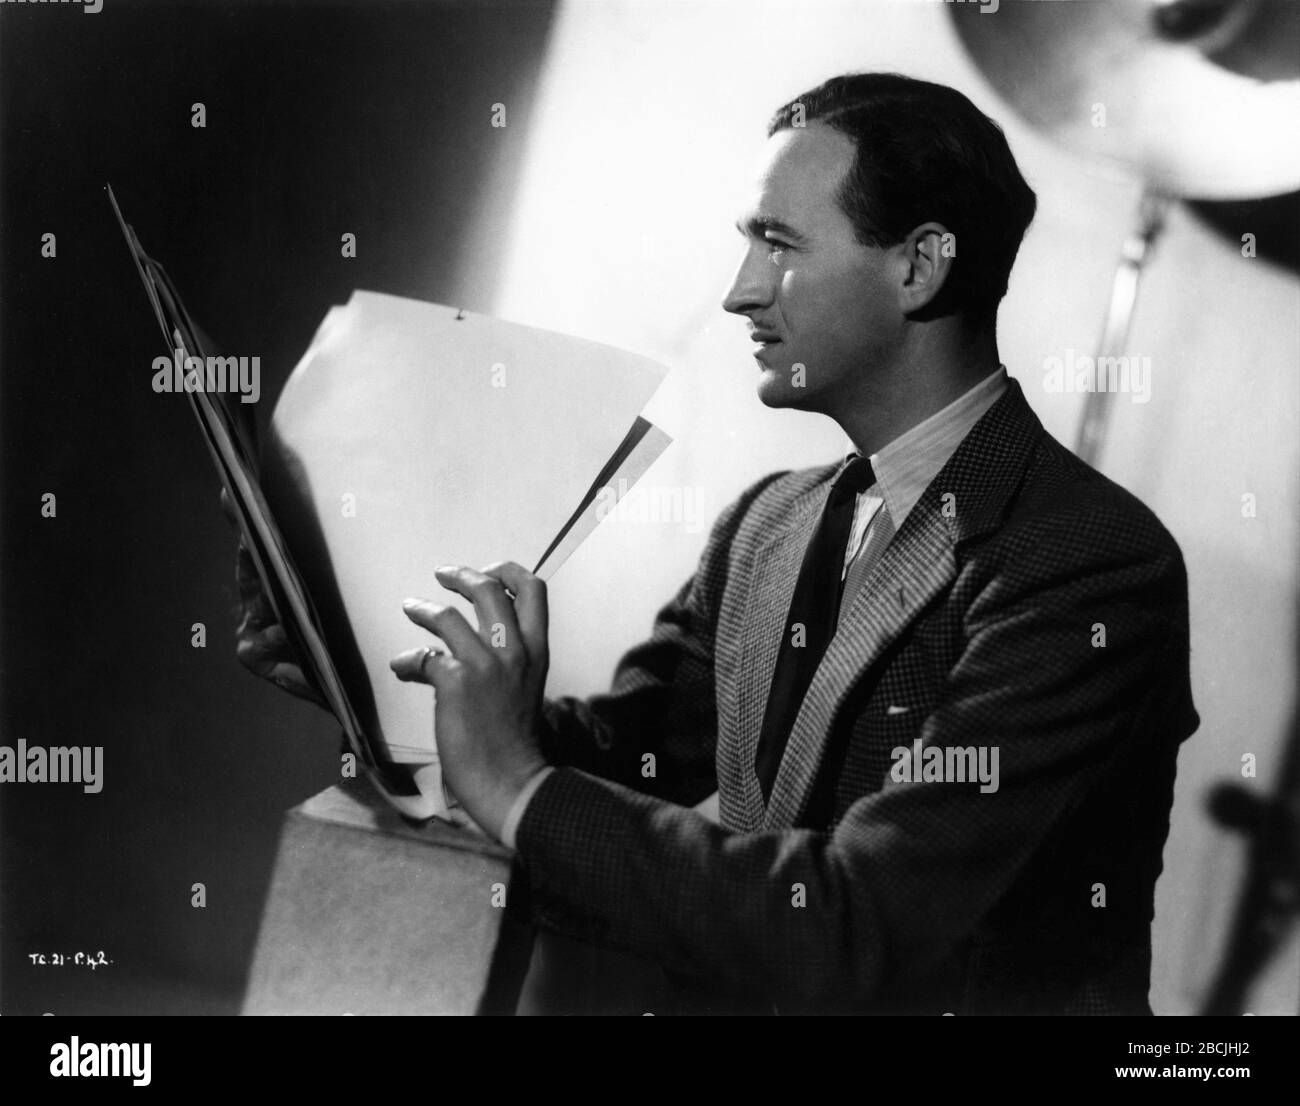 DAVID NIVEN Candid Publicity Portrait for THE WAY AHEAD 1944 director CAROL REED original story Eric Ambler screenplay Eric Ambler and Peter Ustinov Two Cities Films / Eagle - Lion Distributors Ltd Stock Photo